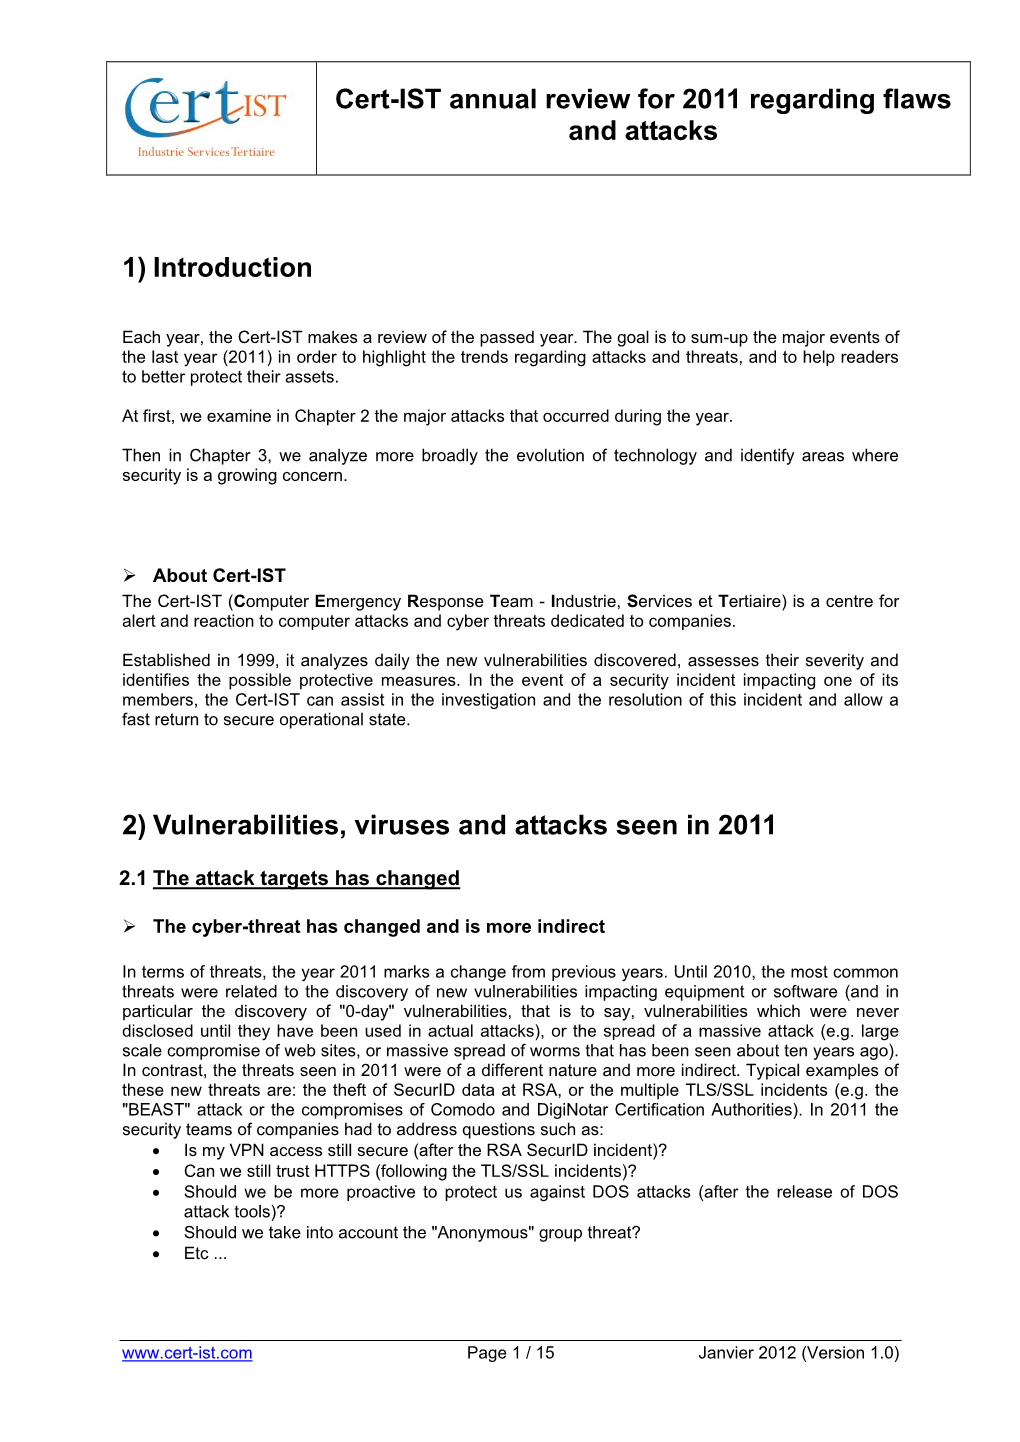 Cert-IST Annual Review for 2011 Regarding Flaws and Attacks 1